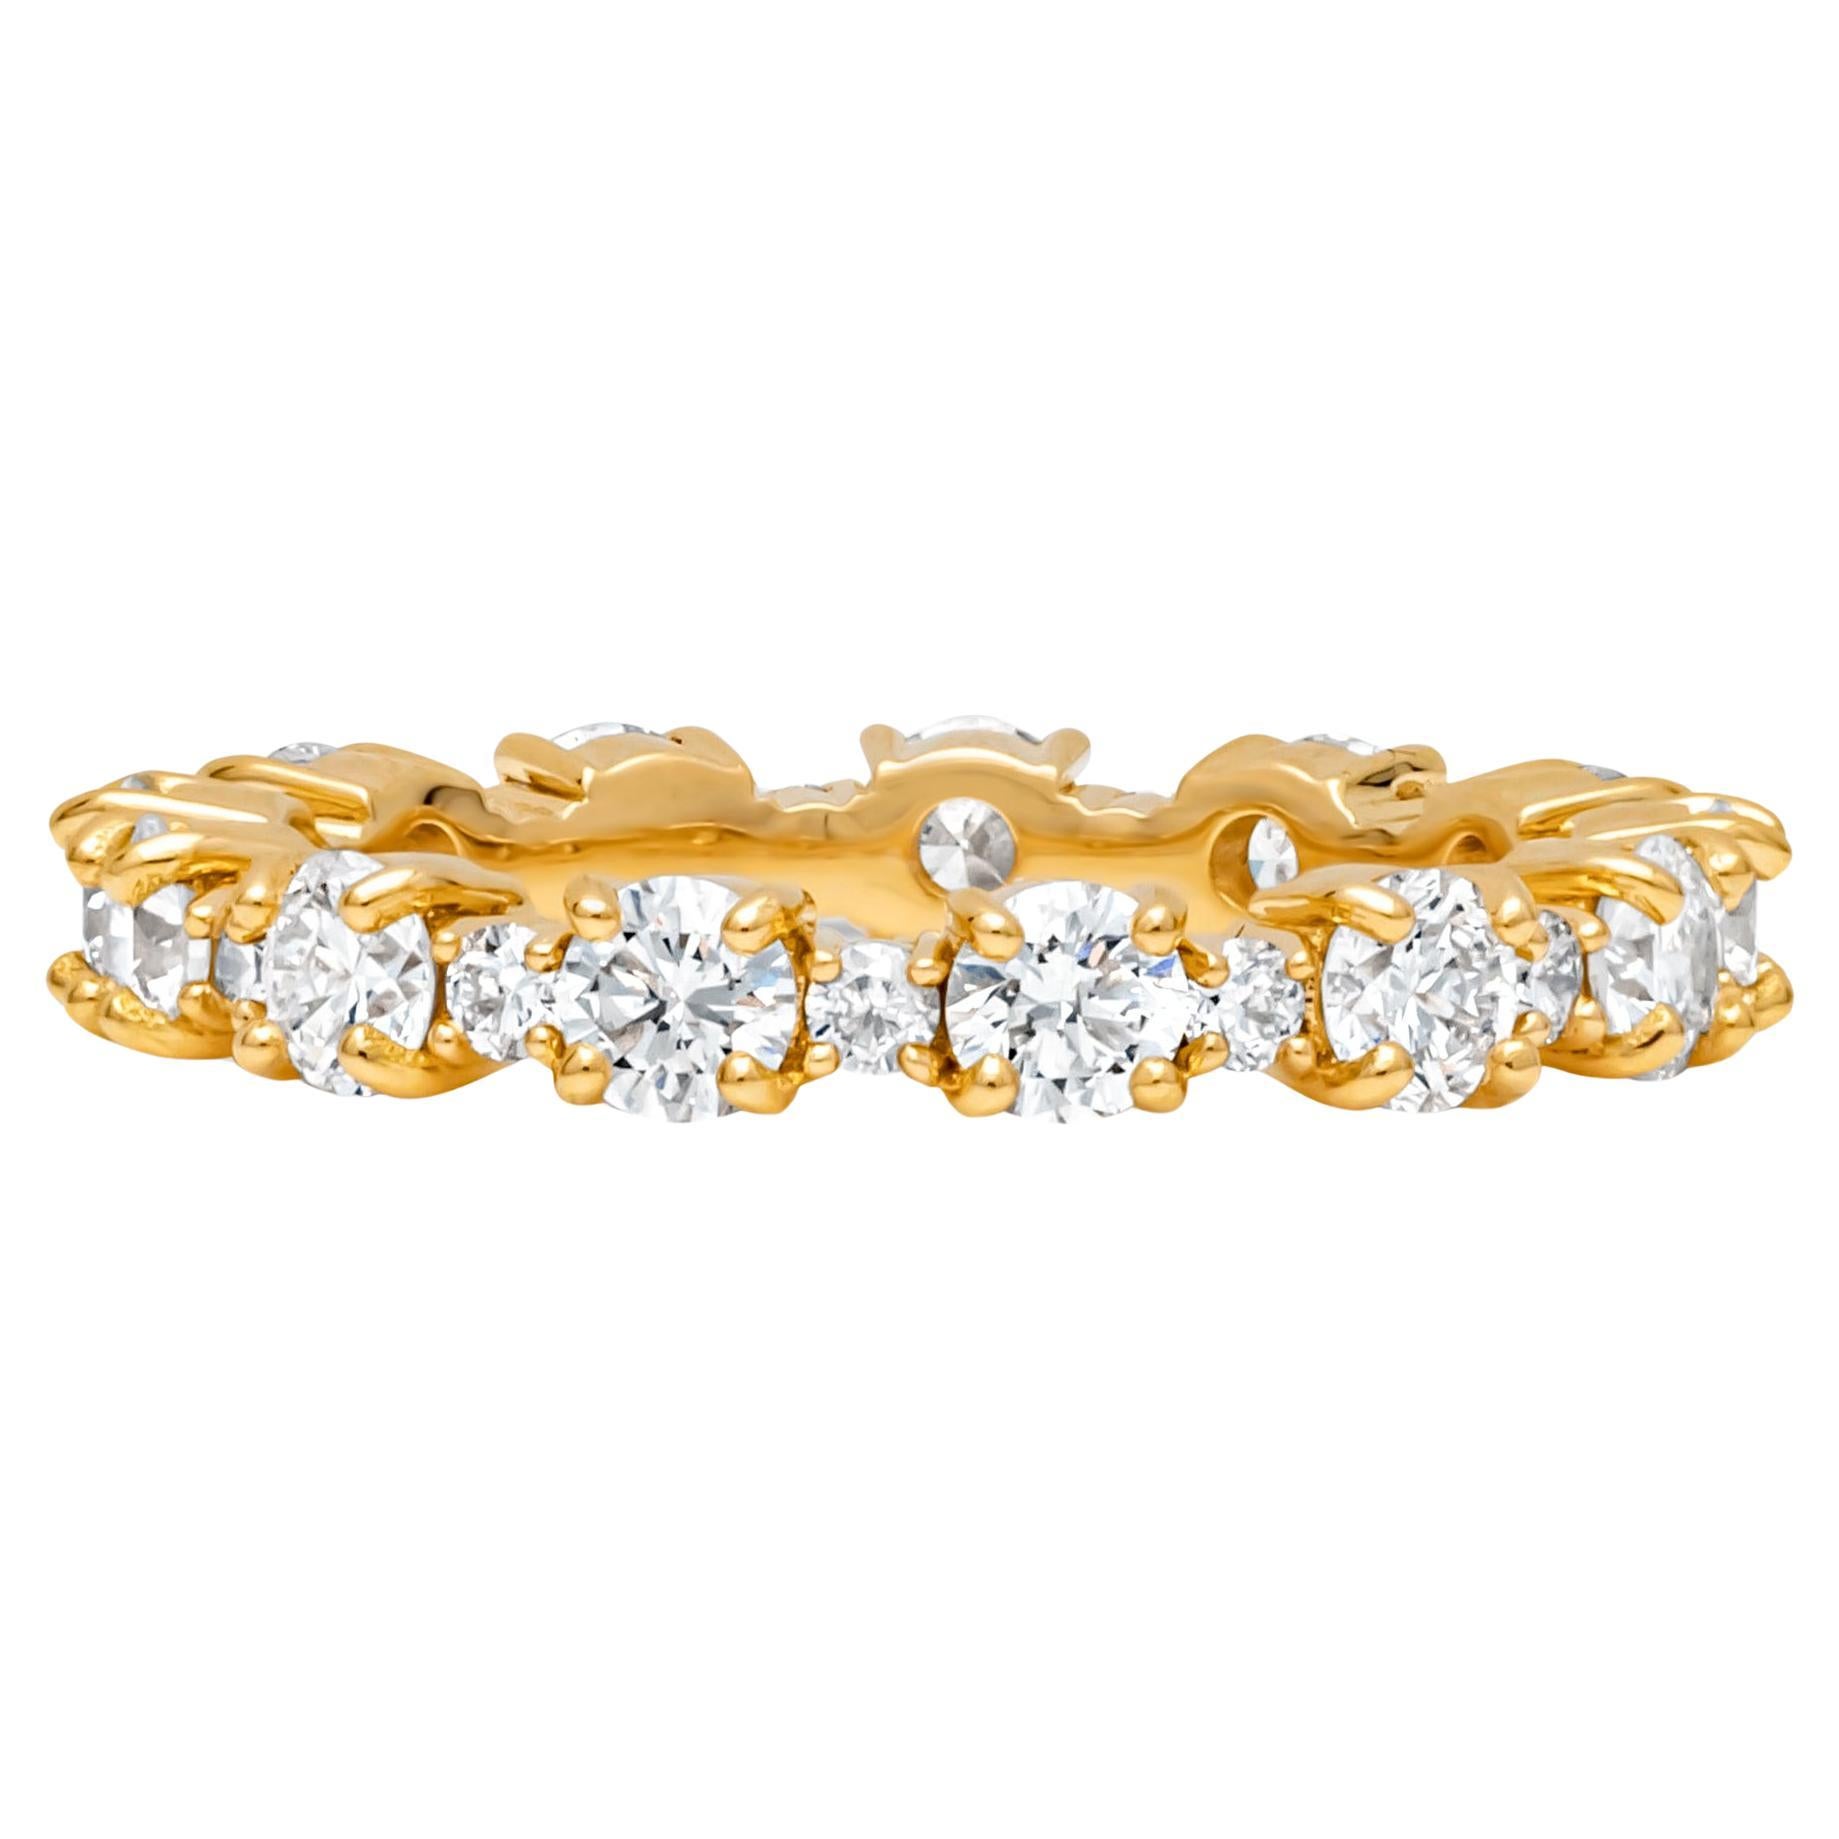 A uniquely-designed eternity wedding band showcasing a row of round brilliant diamonds elegantly spaced by smaller round melee diamonds weighing 1.77 carats total, H Color and VS in Clarity. Set in a classic four prong basket setting and Made in 18K